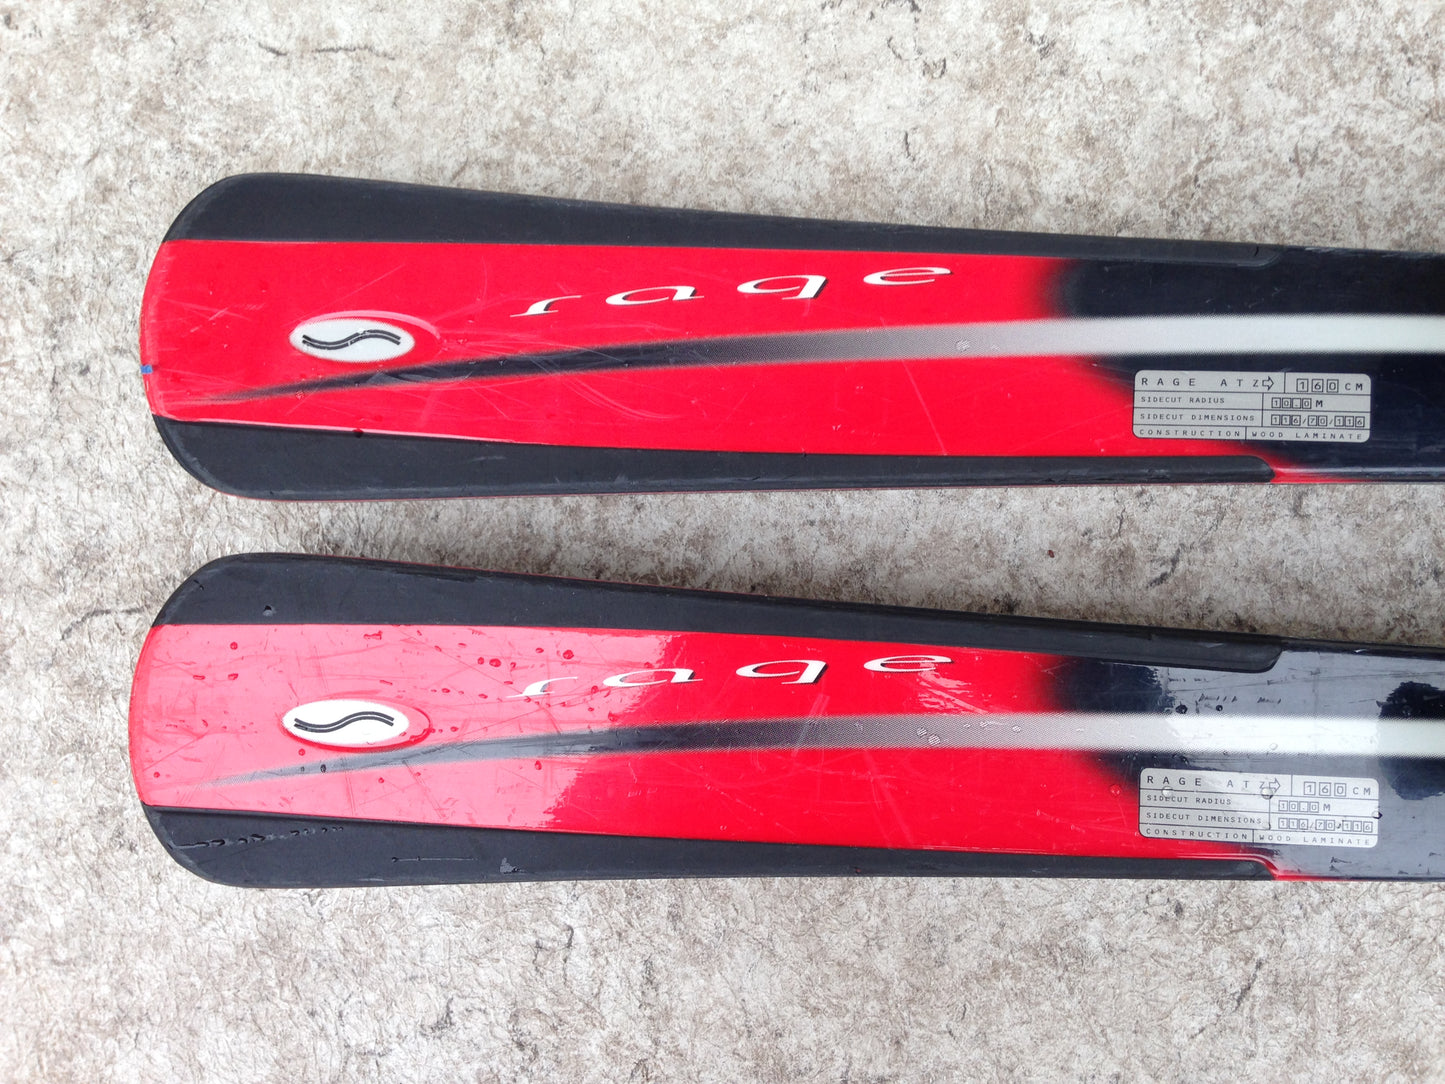 Ski 160 Scott Air Parabolic Black Red Grey With Bindings Excellent